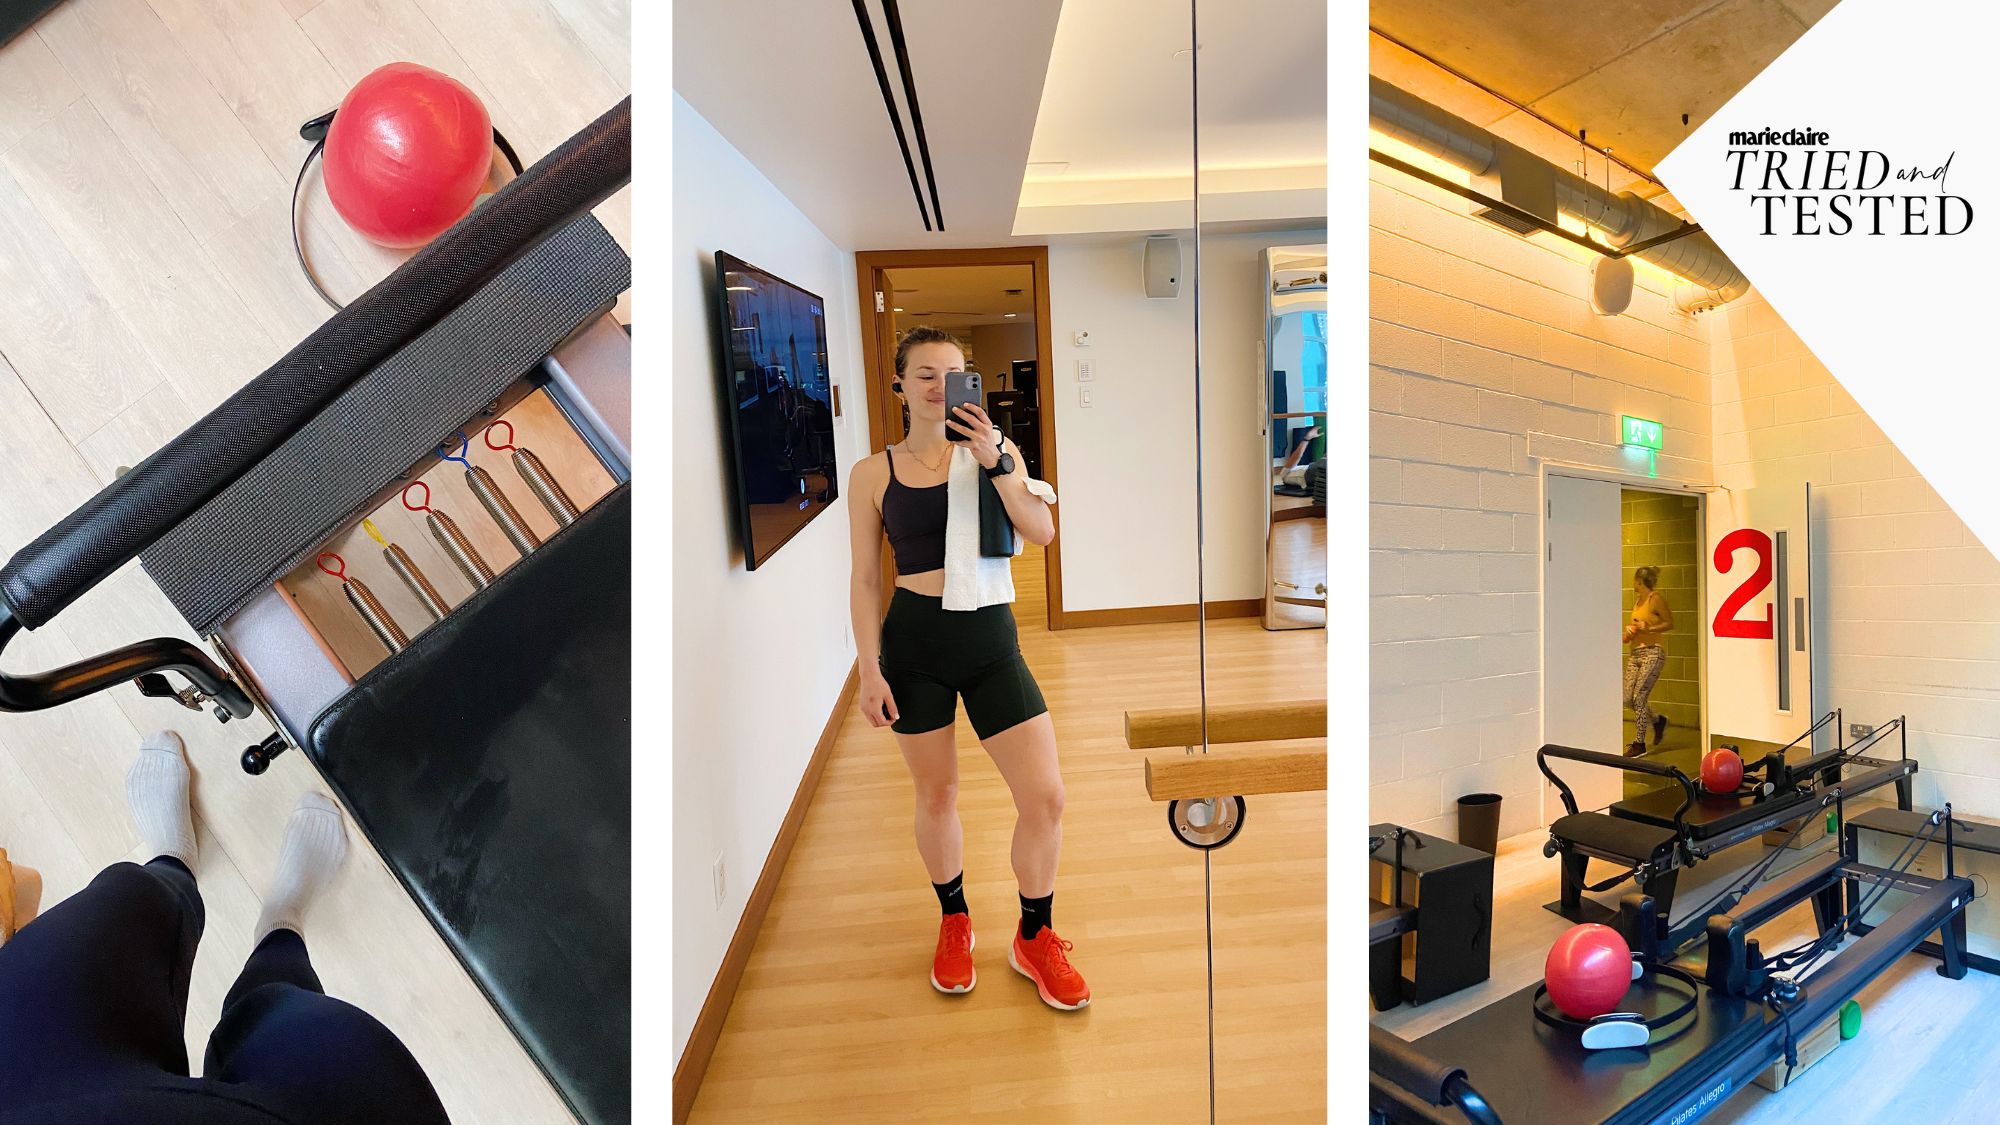 Reformer Pilates before and after: A month totally changed my body